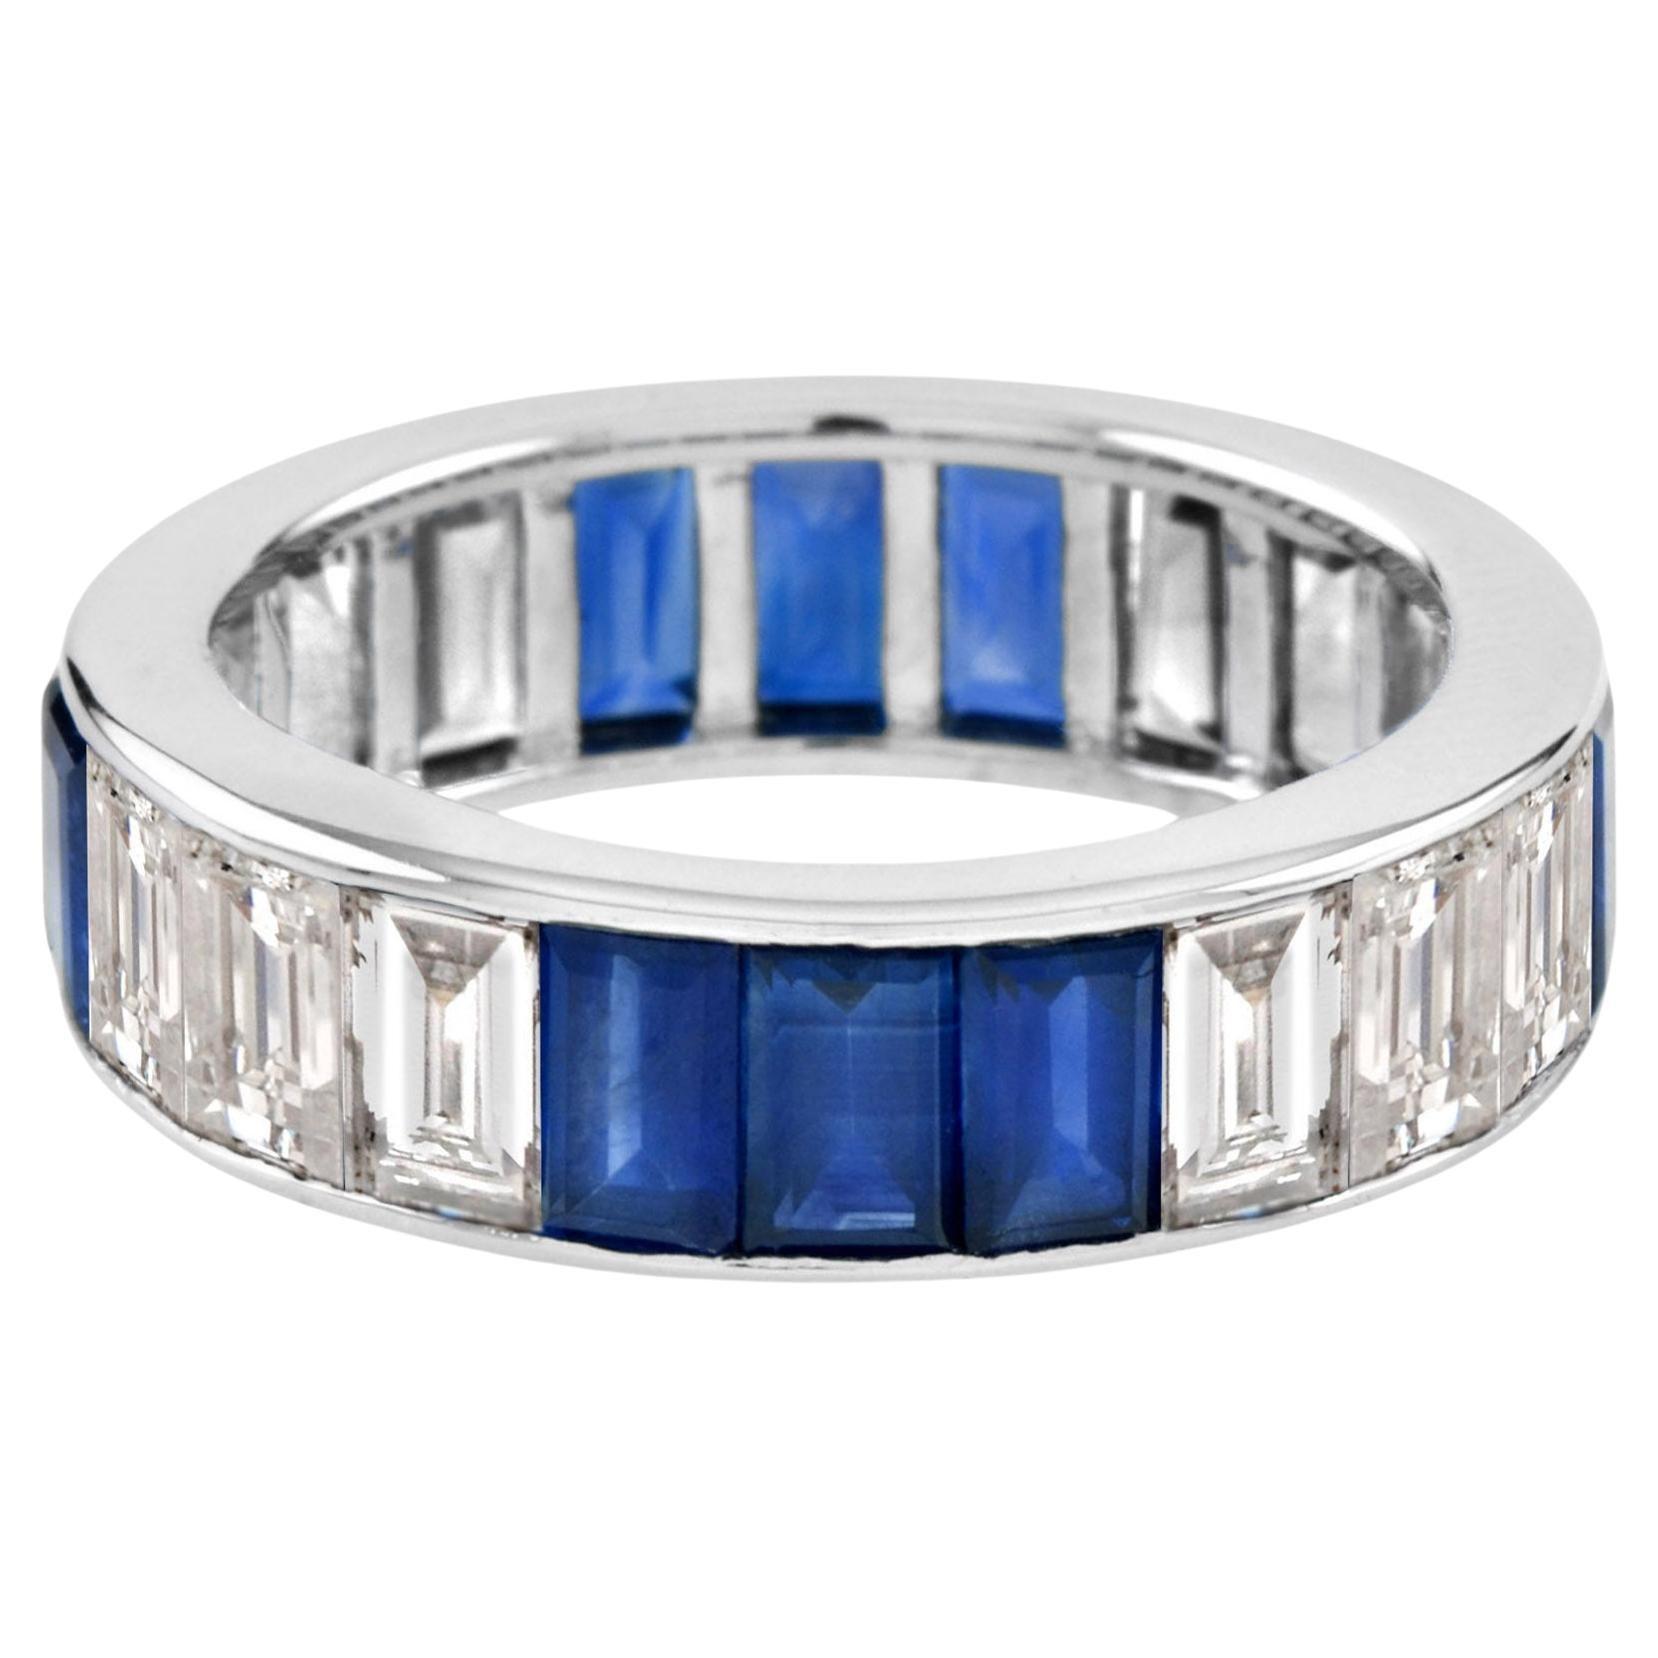 For Sale:  Seamless 3.3 Ct. Baguette Diamond and Blue Sapphire Band Ring in Platinum950